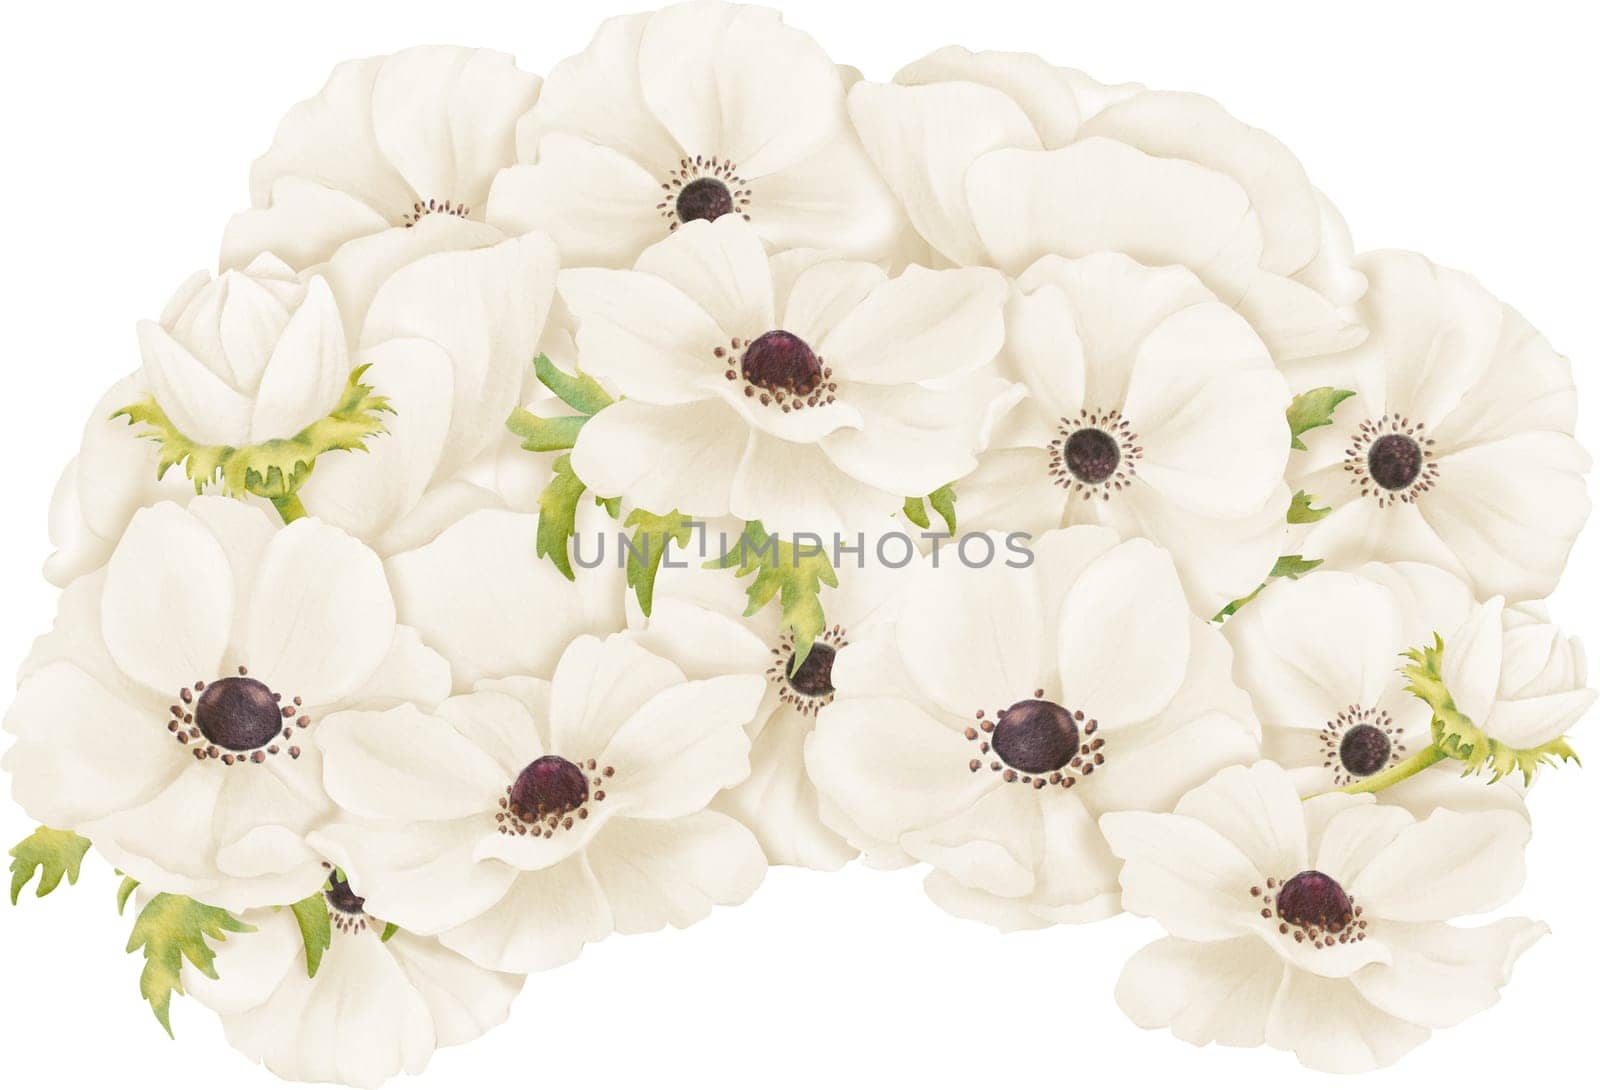 illustration featuring white anemones arranged in a composition. This artwork is for use in greeting card designs, web design, advertising by Art_Mari_Ka